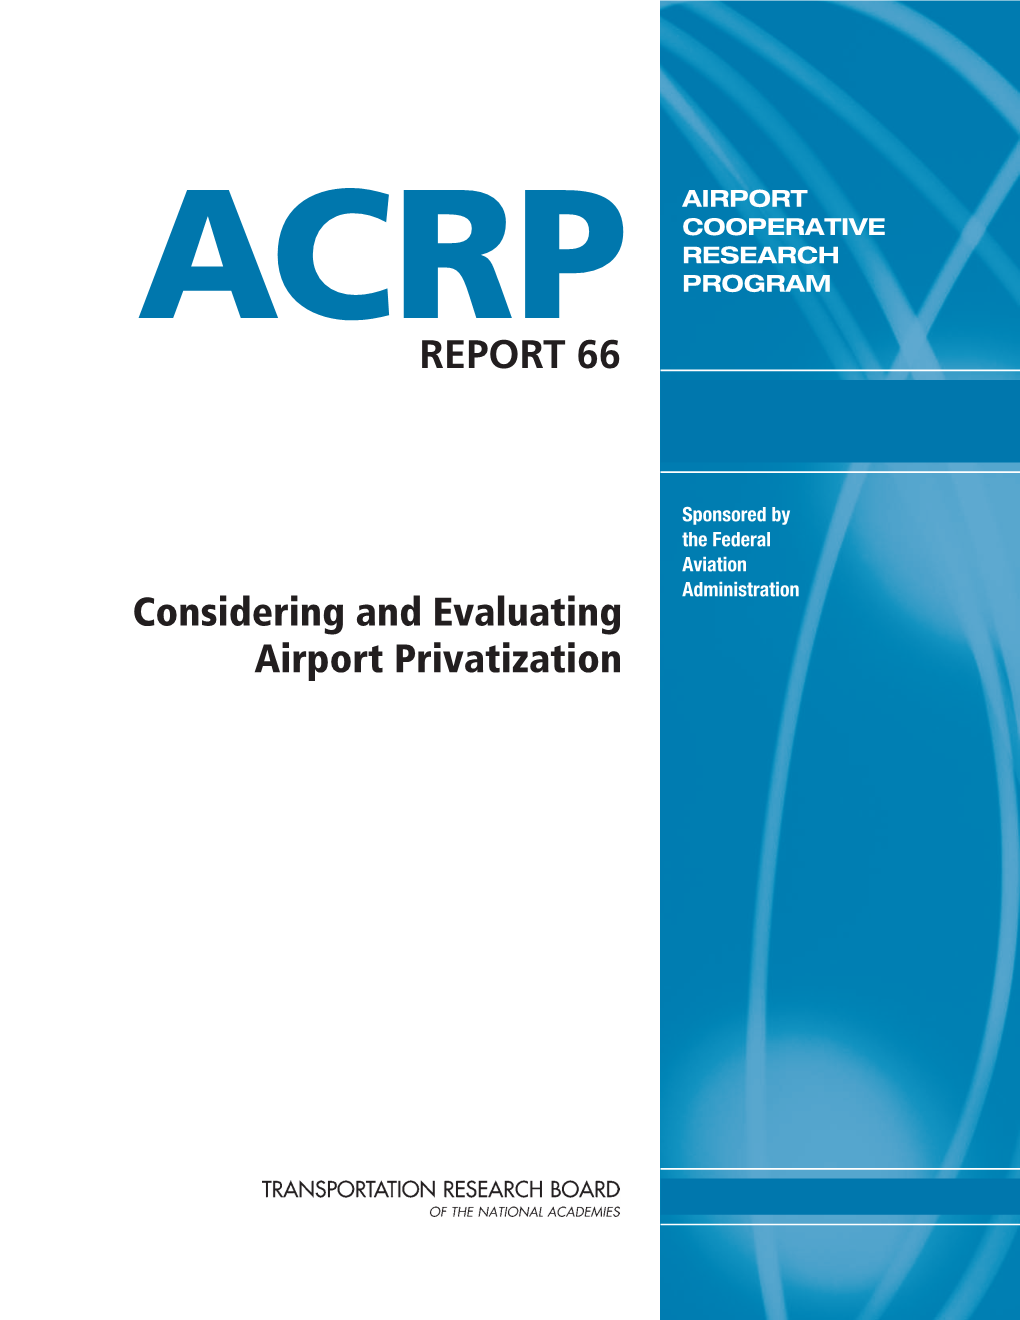 ACRP Report 66 – Considering and Evaluating Airport Privatization